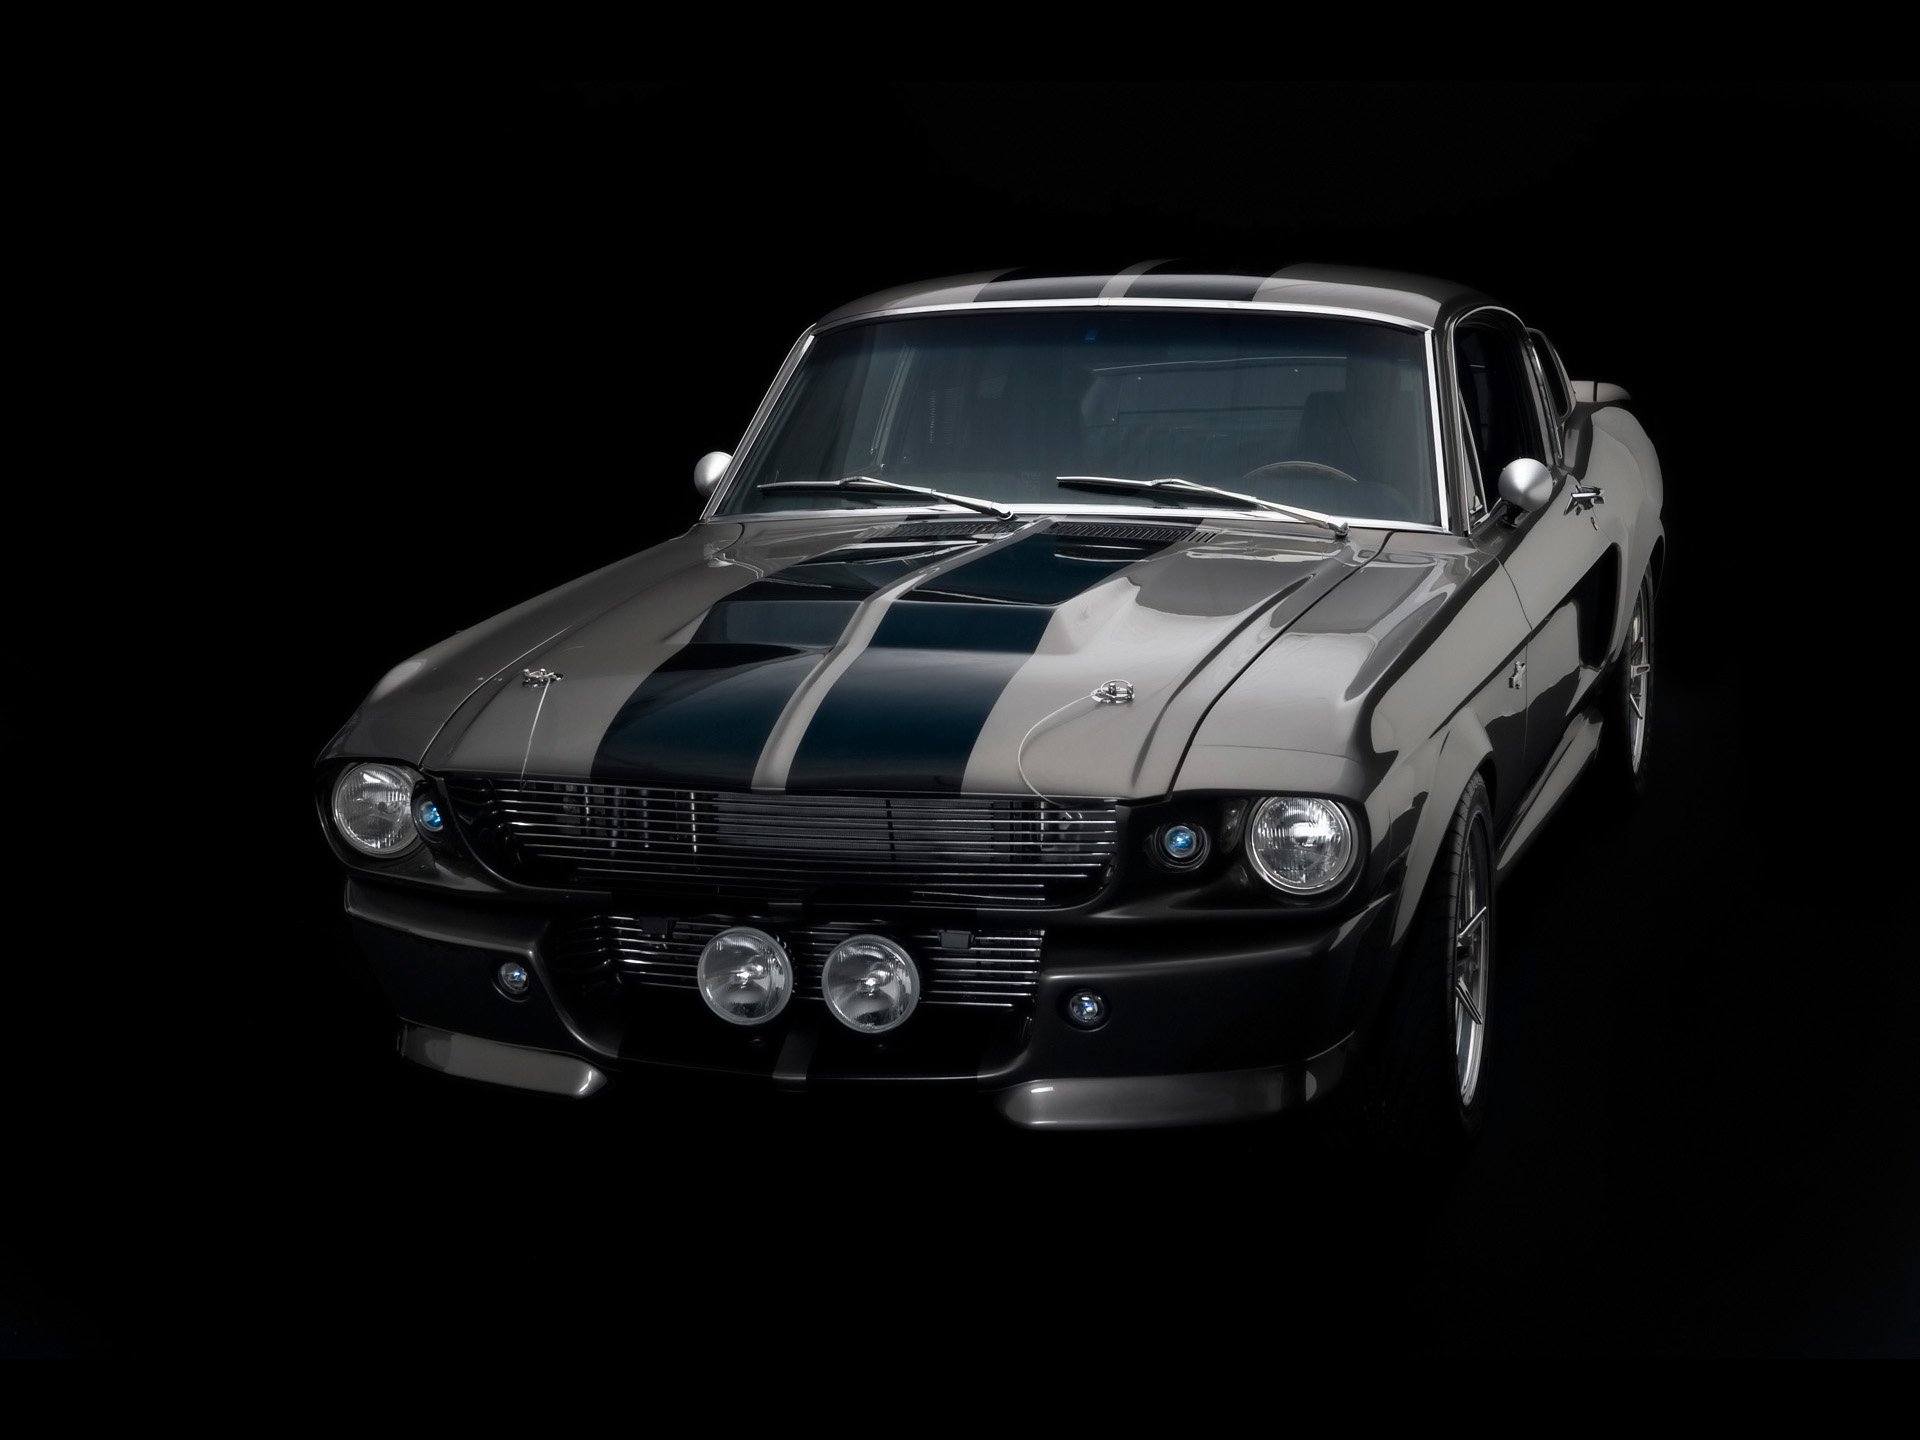 cars, Muscle, Cars, Eleanor, Ford, Mustang, Shelby, Gt500 Wallpaper